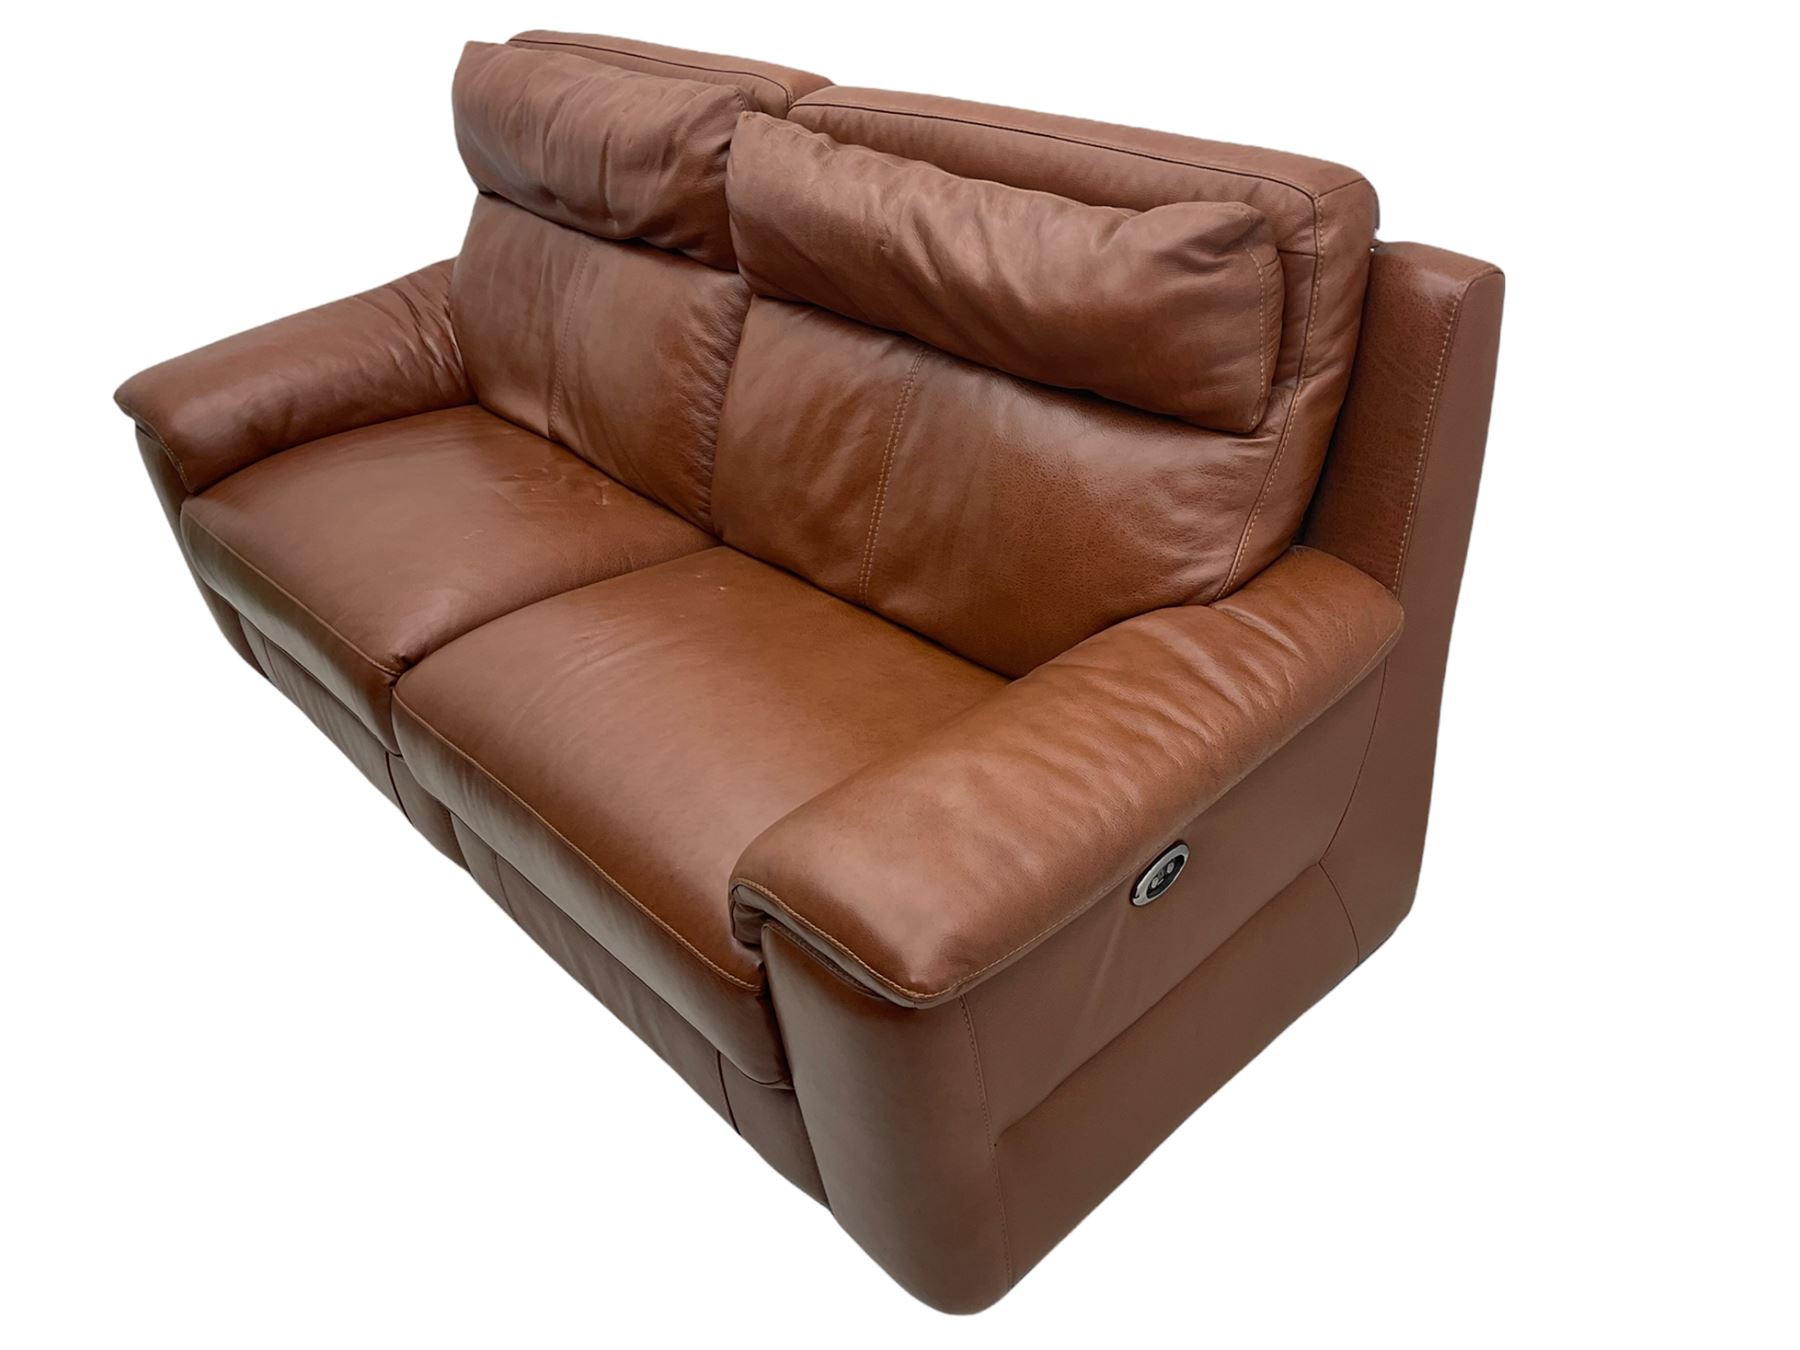 Three electric reclining sofa upholstered in tan leather - Image 6 of 23